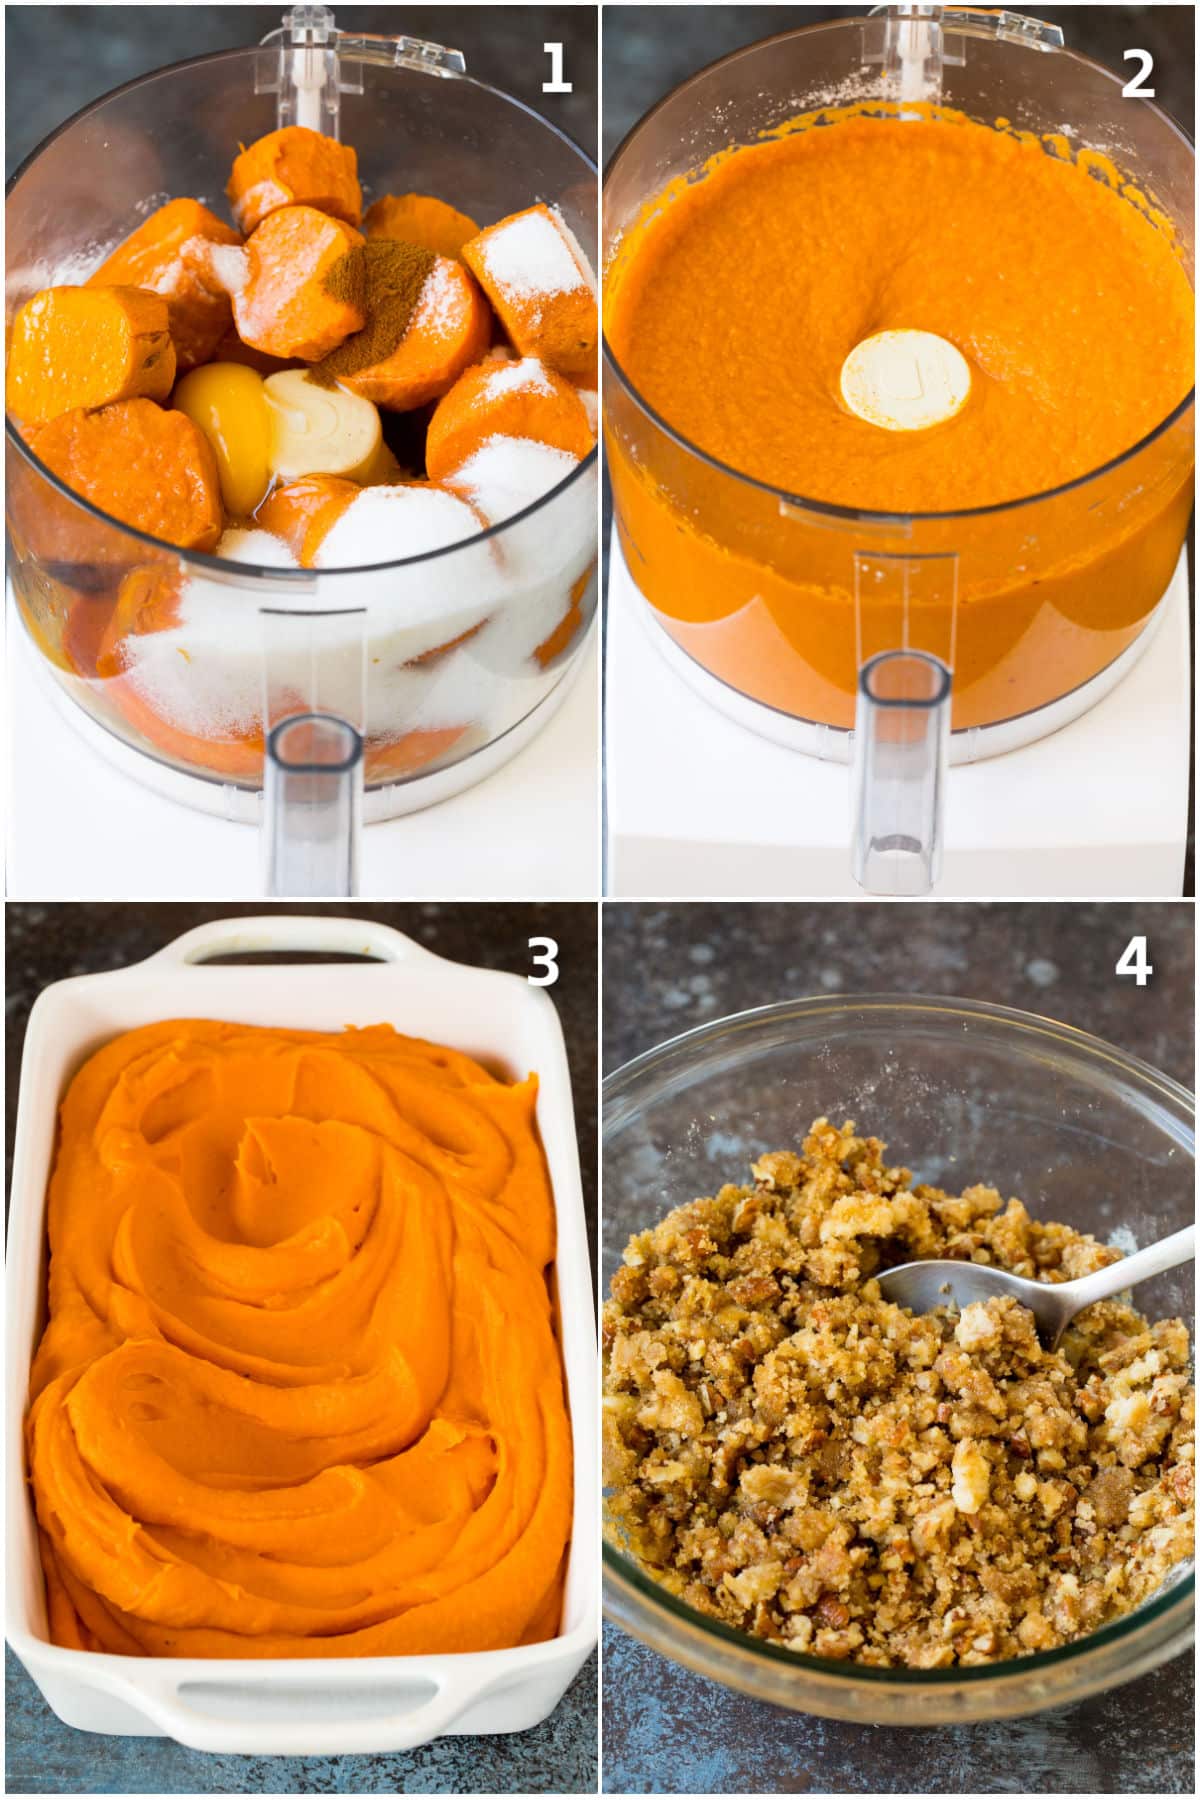 Step by step process shots showing how to make sweet potato souffle.